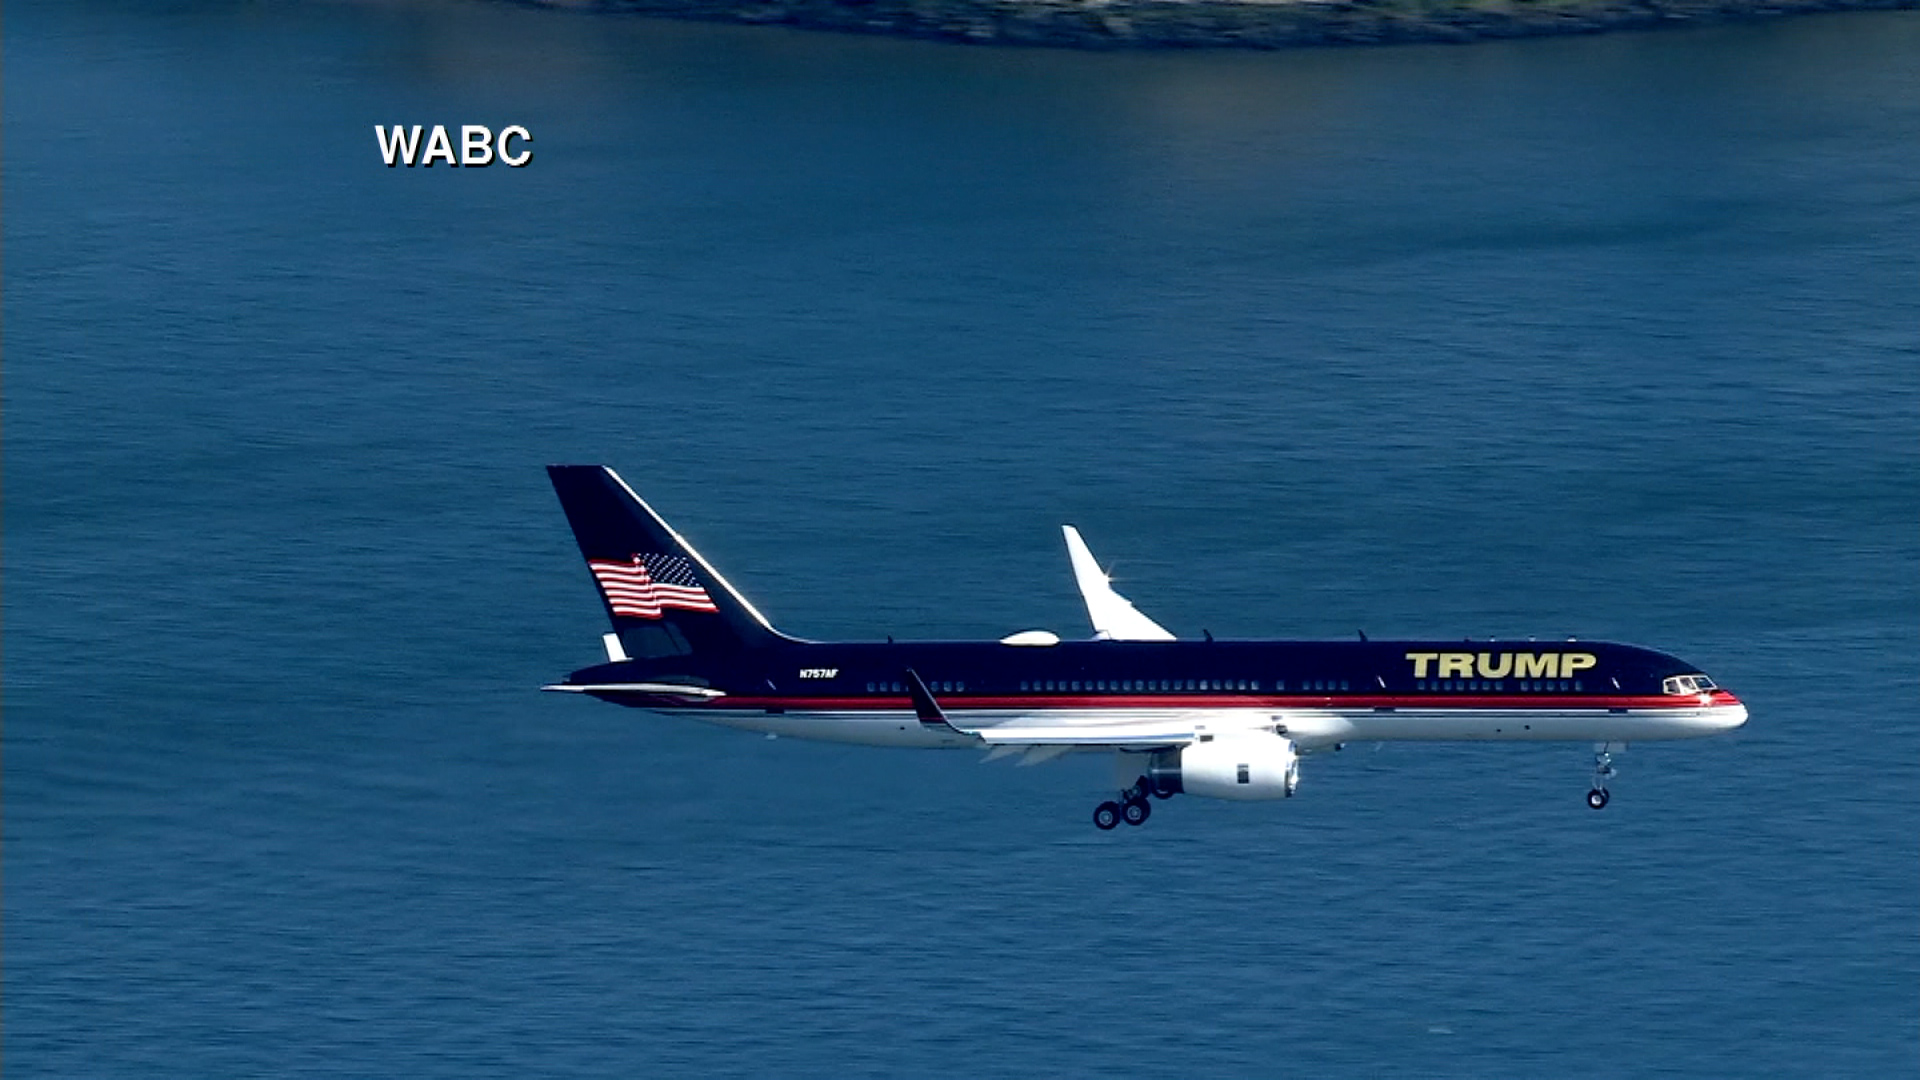 Former President Donald Trump arrives in New York on Monday.